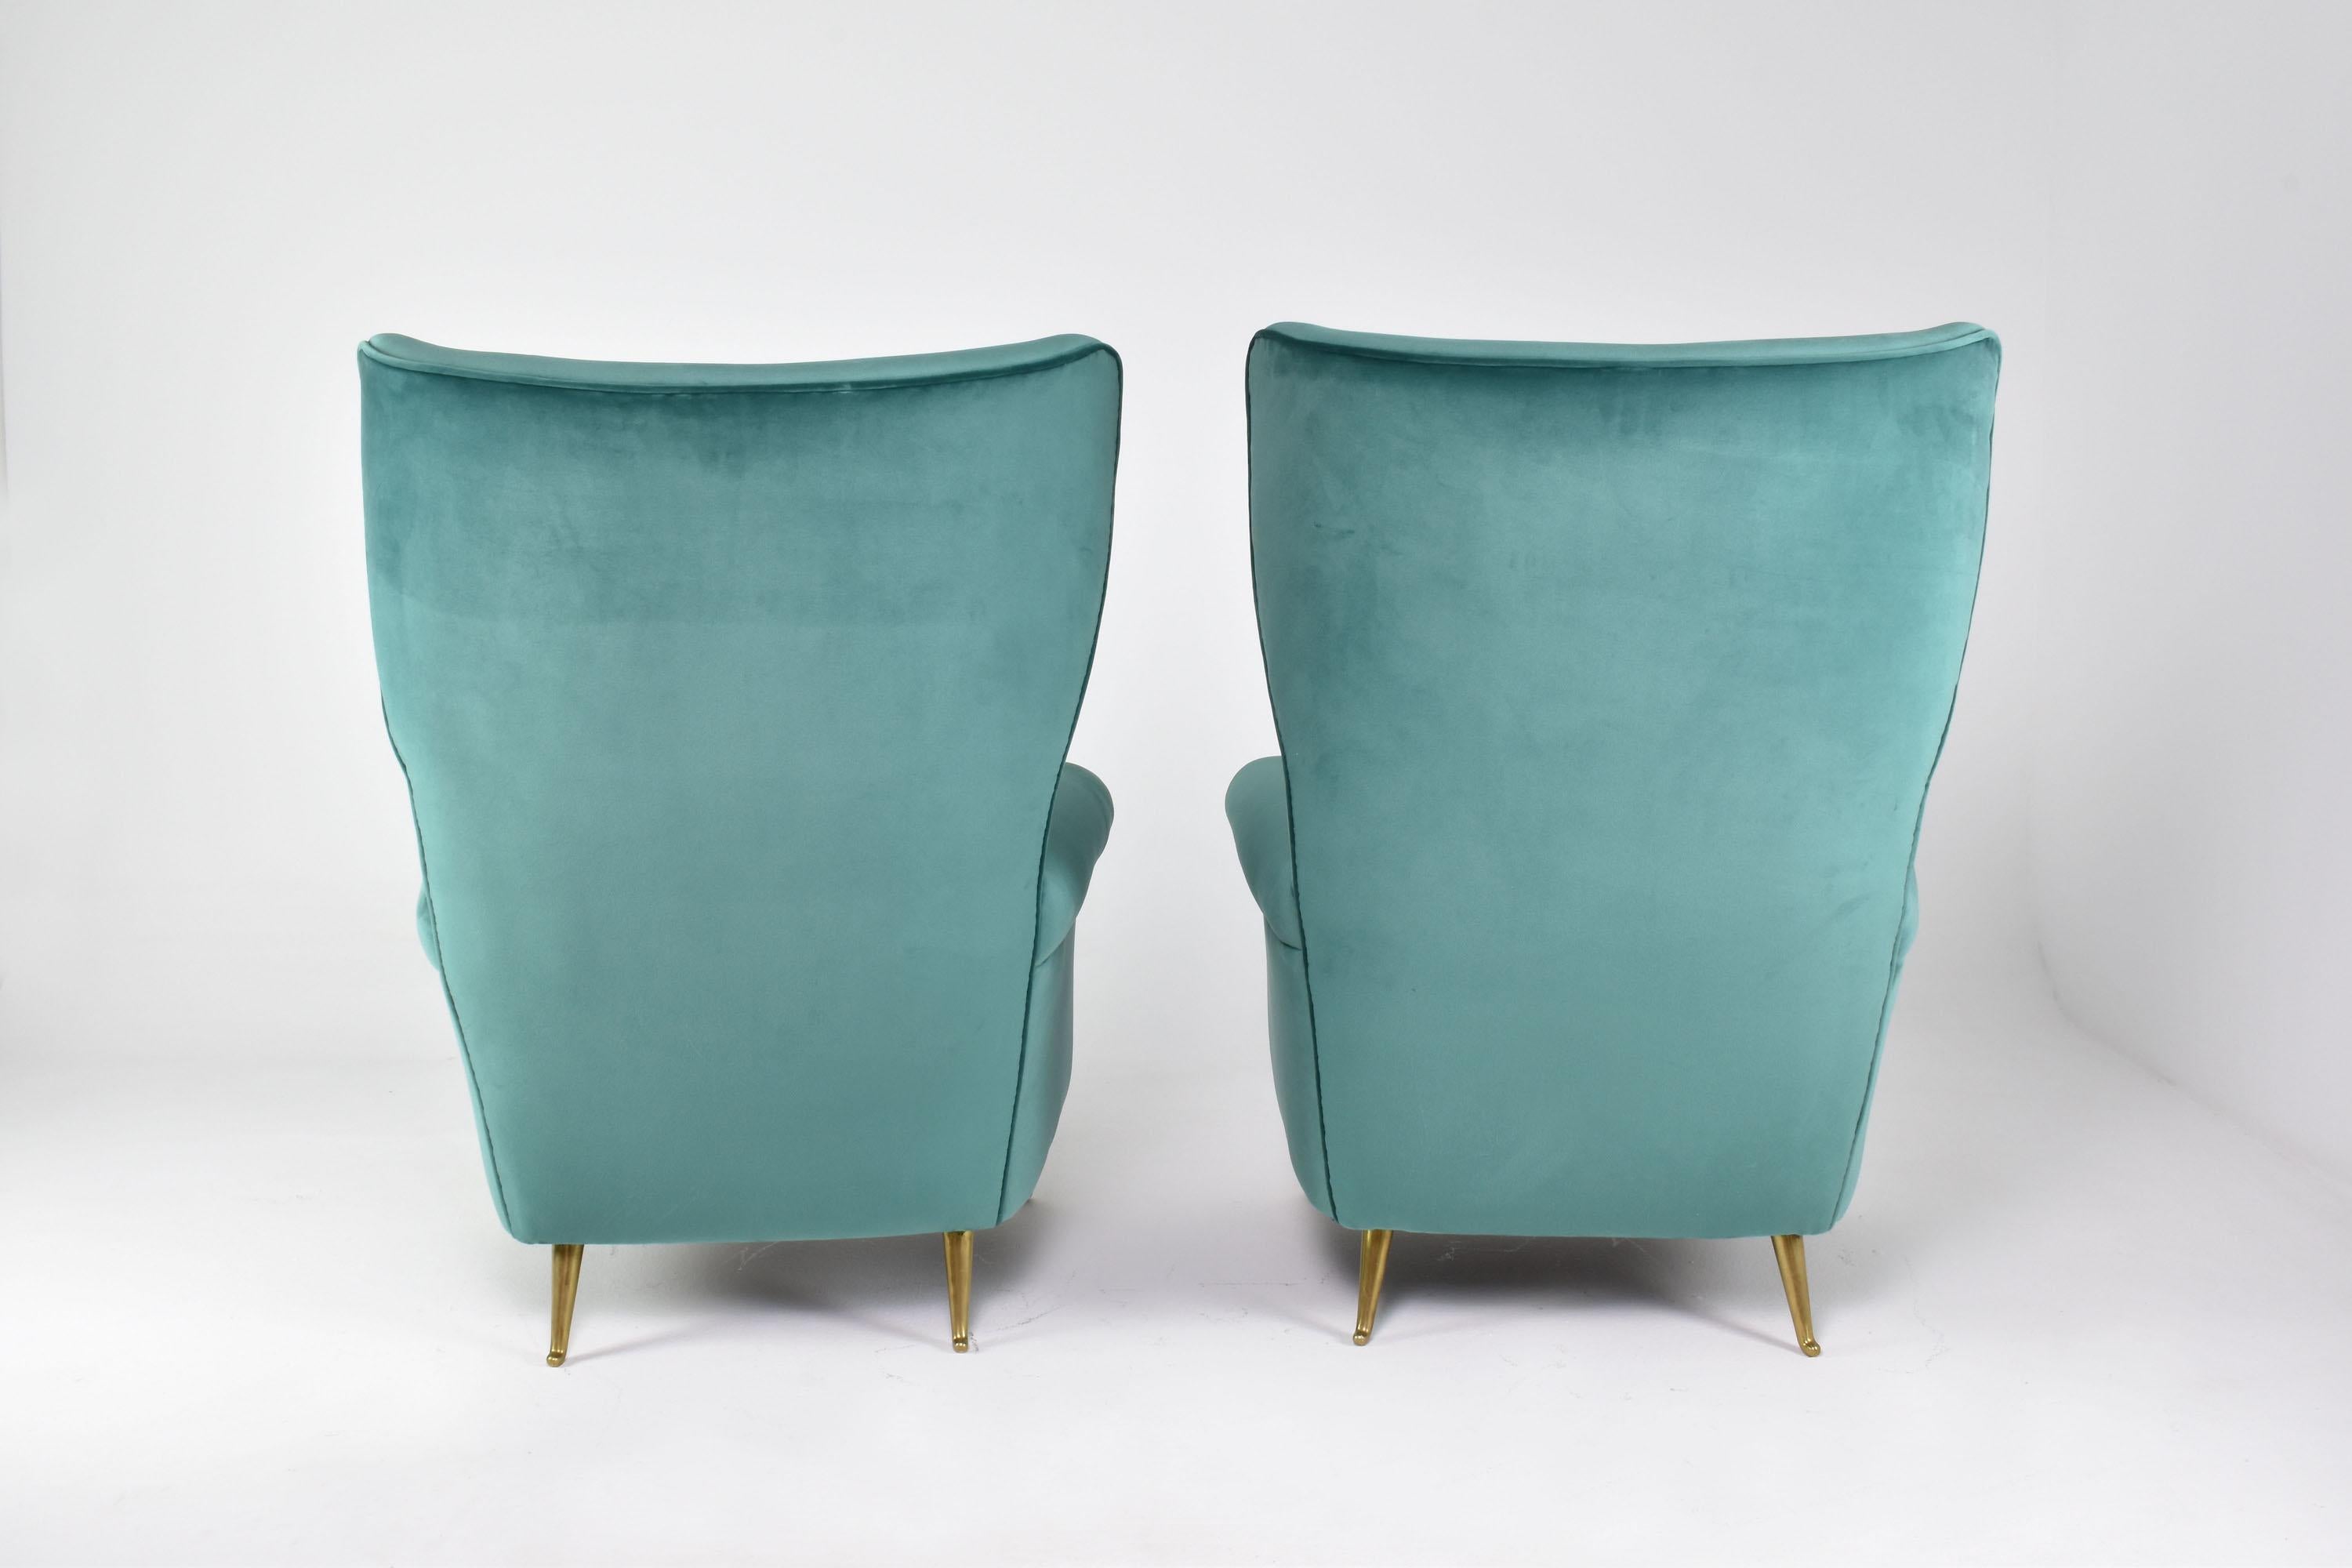 Italian Midcentury Armchairs by ISA Bergamo, Set of Two, 1950s For Sale 7